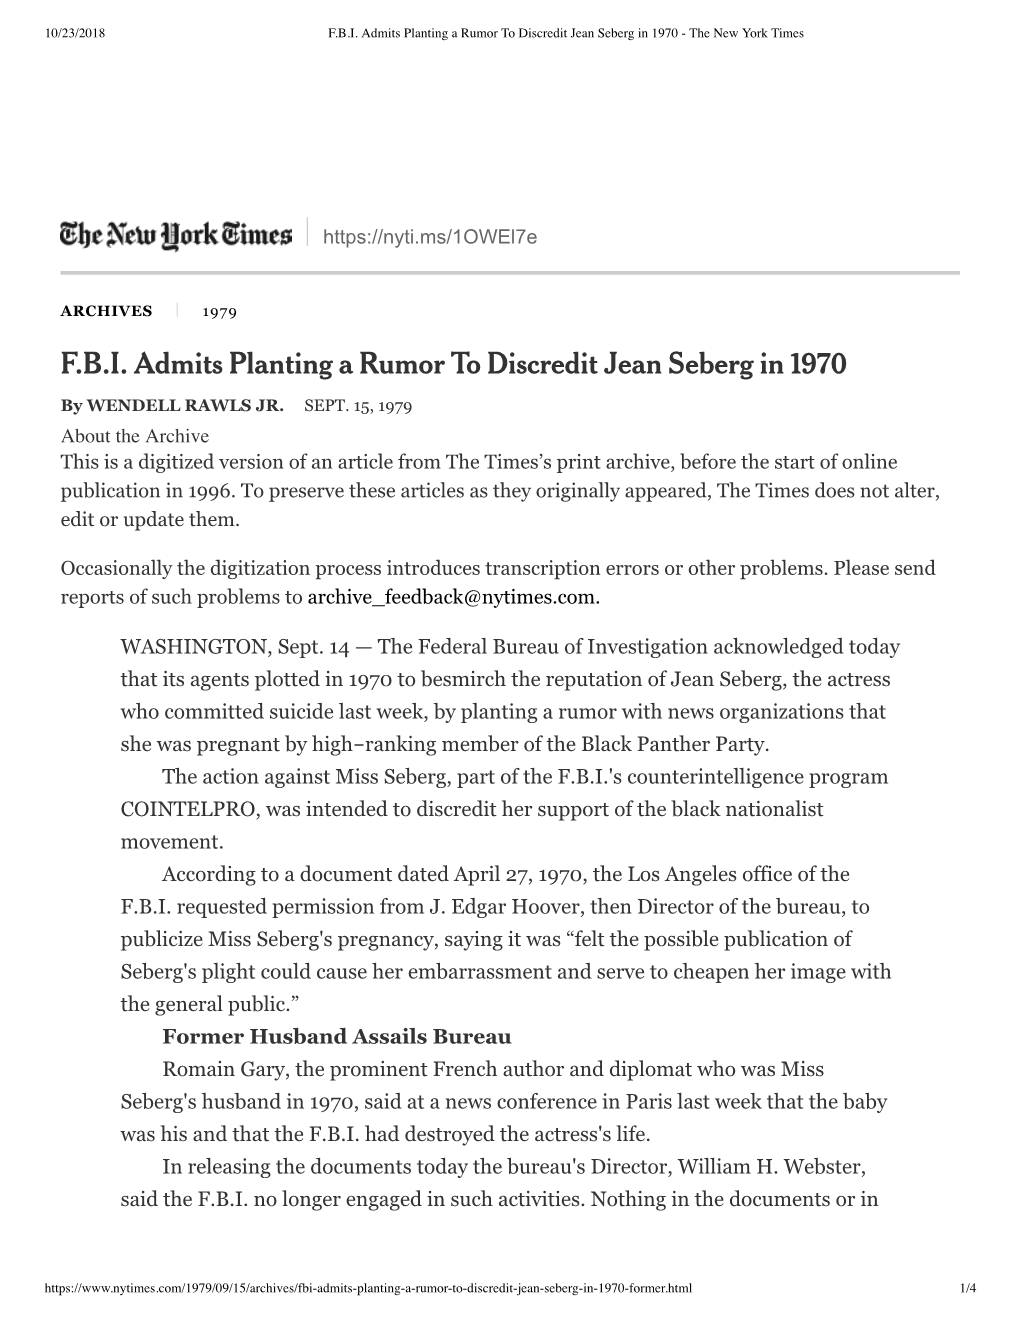 F.B.I. Admits Planting a Rumor to Discredit Jean Seberg in 1970 - the New York Times